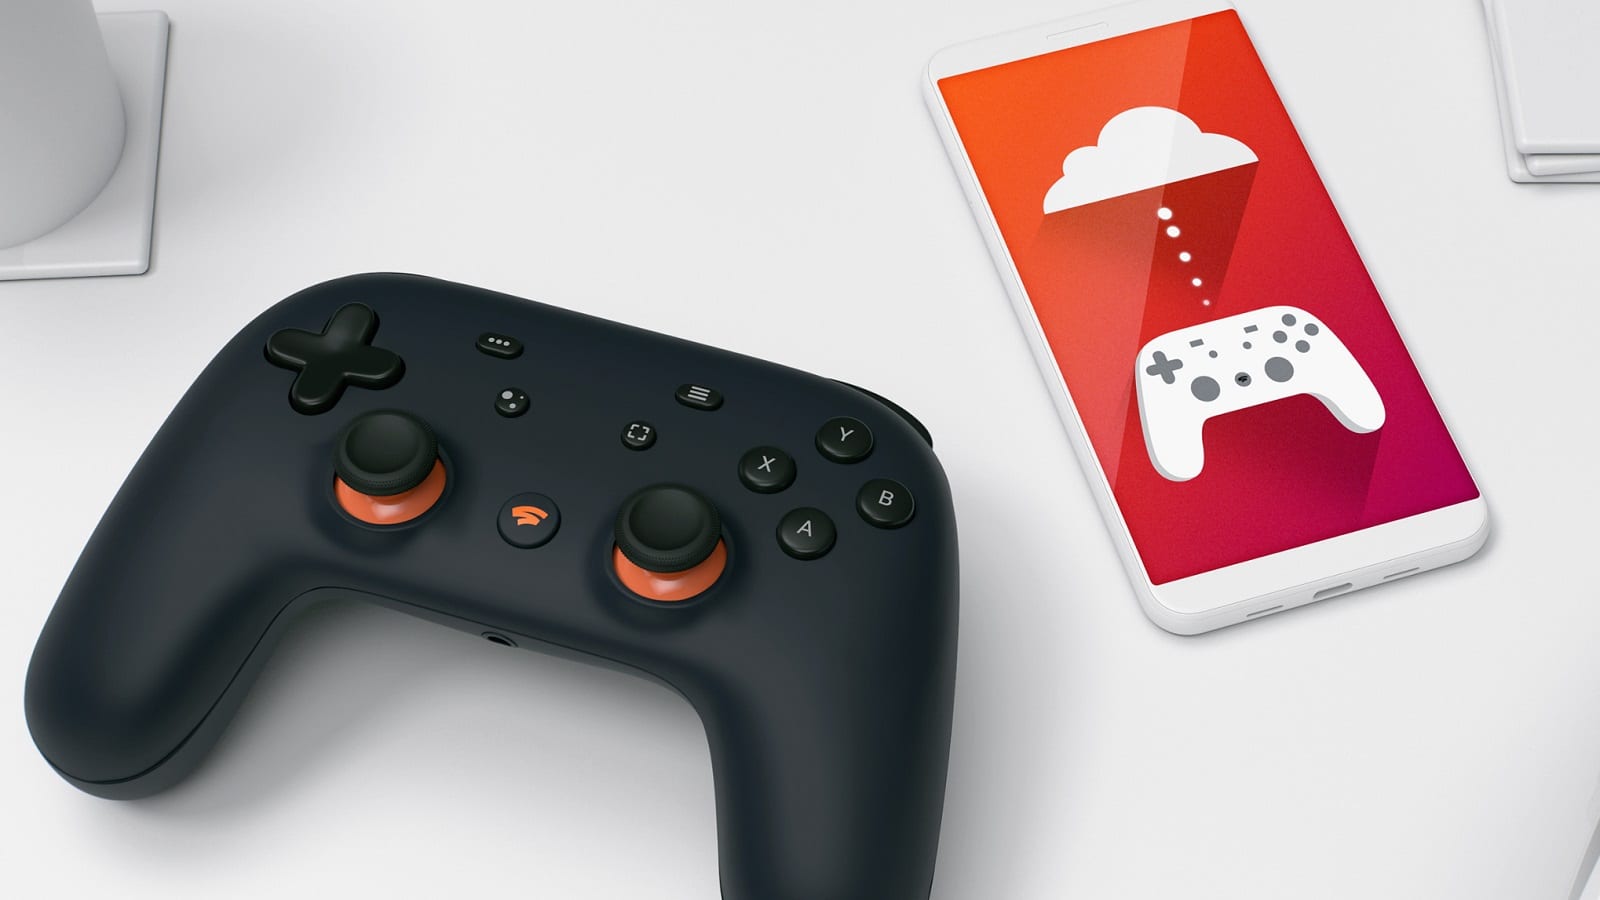 verzoek Ineenstorting Diplomatieke kwesties A year later and Google Stadia's still kicking, what should it do to stay  in the game this generation? - GAMING TREND